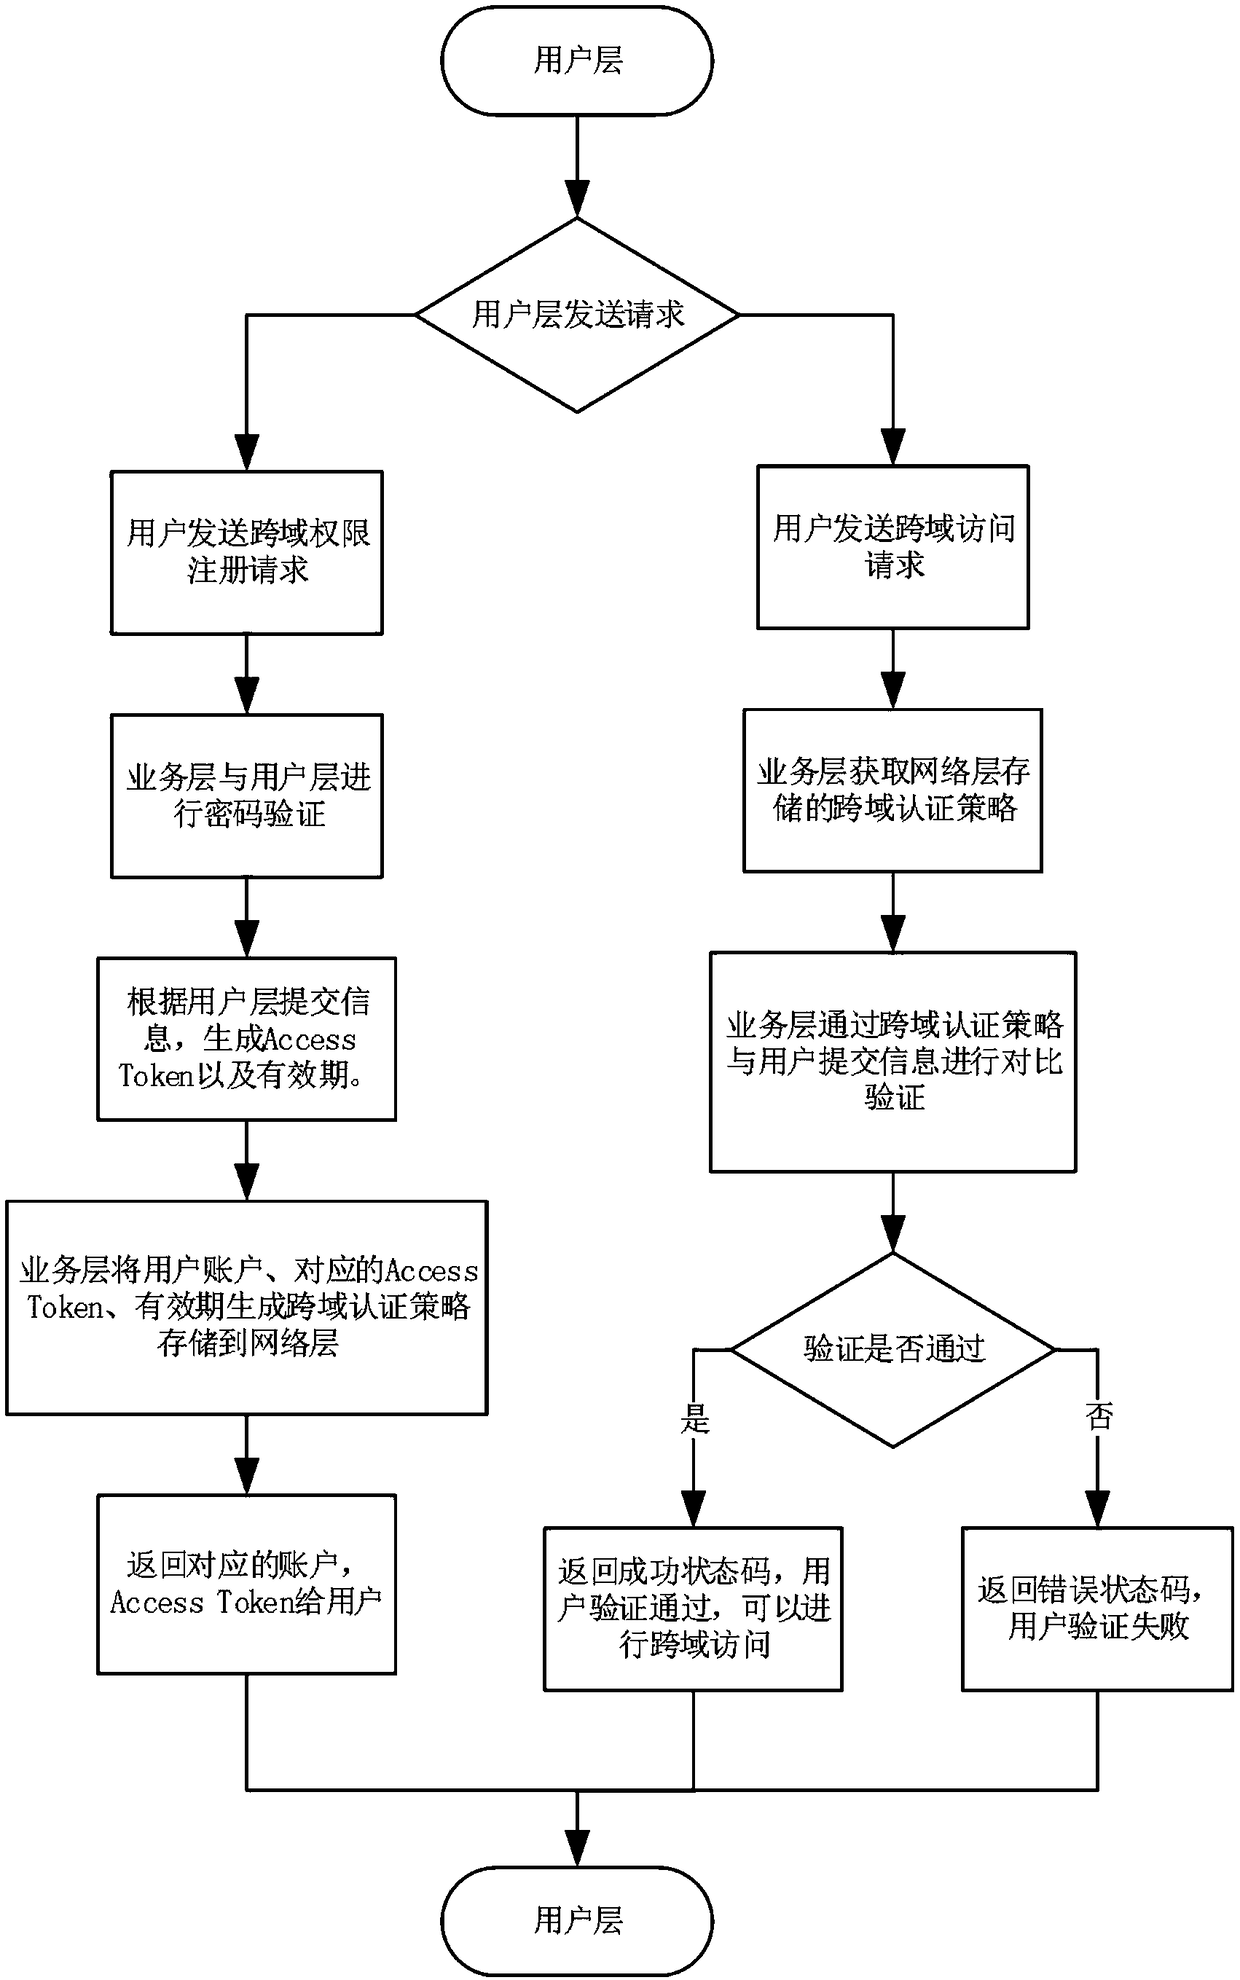 Internet of Things (IoT) cross-domain authentication system and method based on block chain